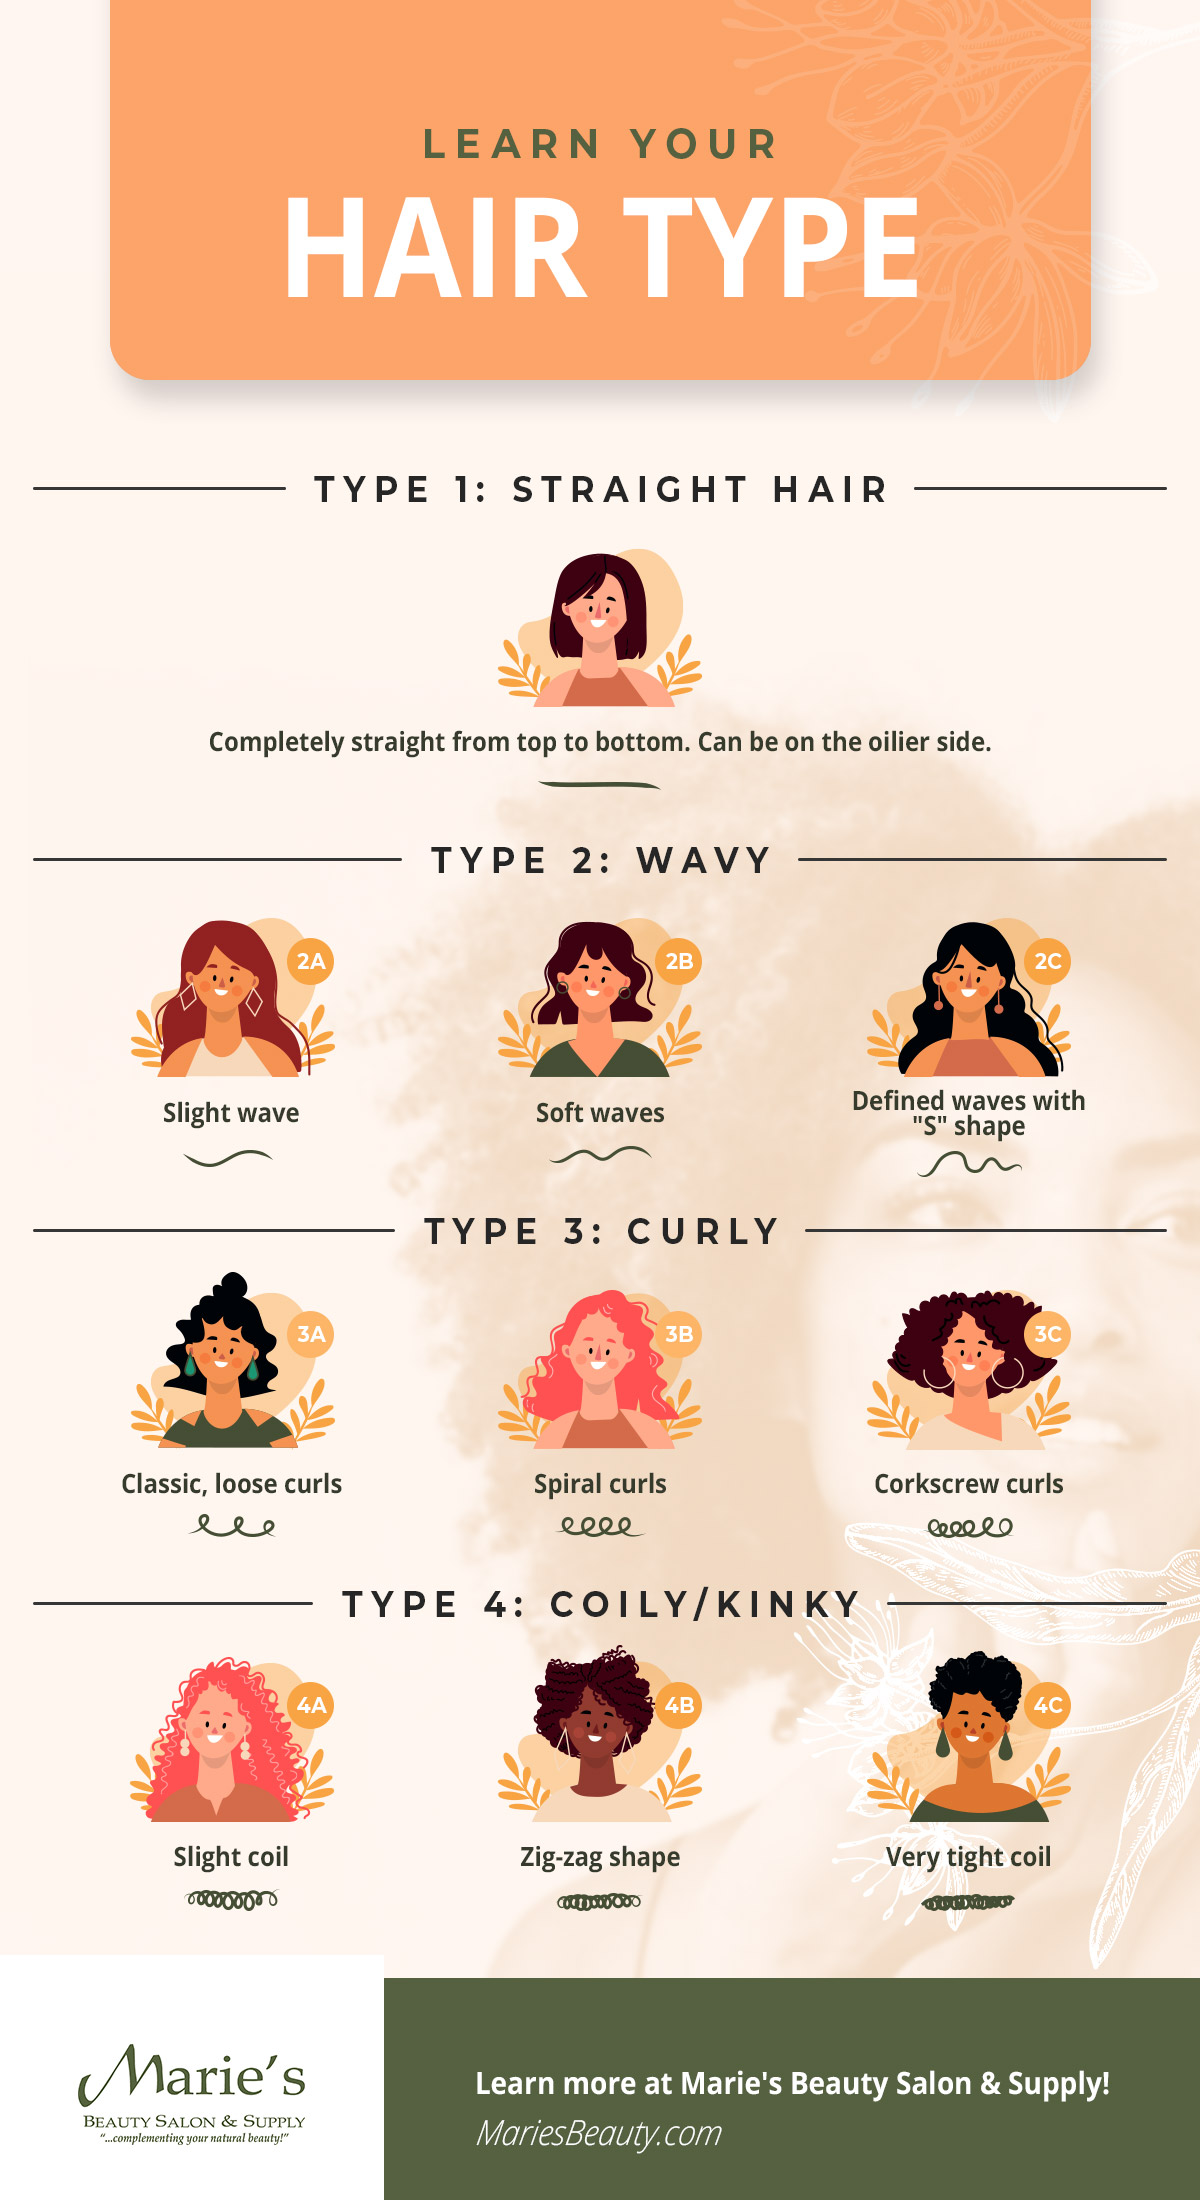 Hair Care Anchorage - Read Our Hair Type Guide!